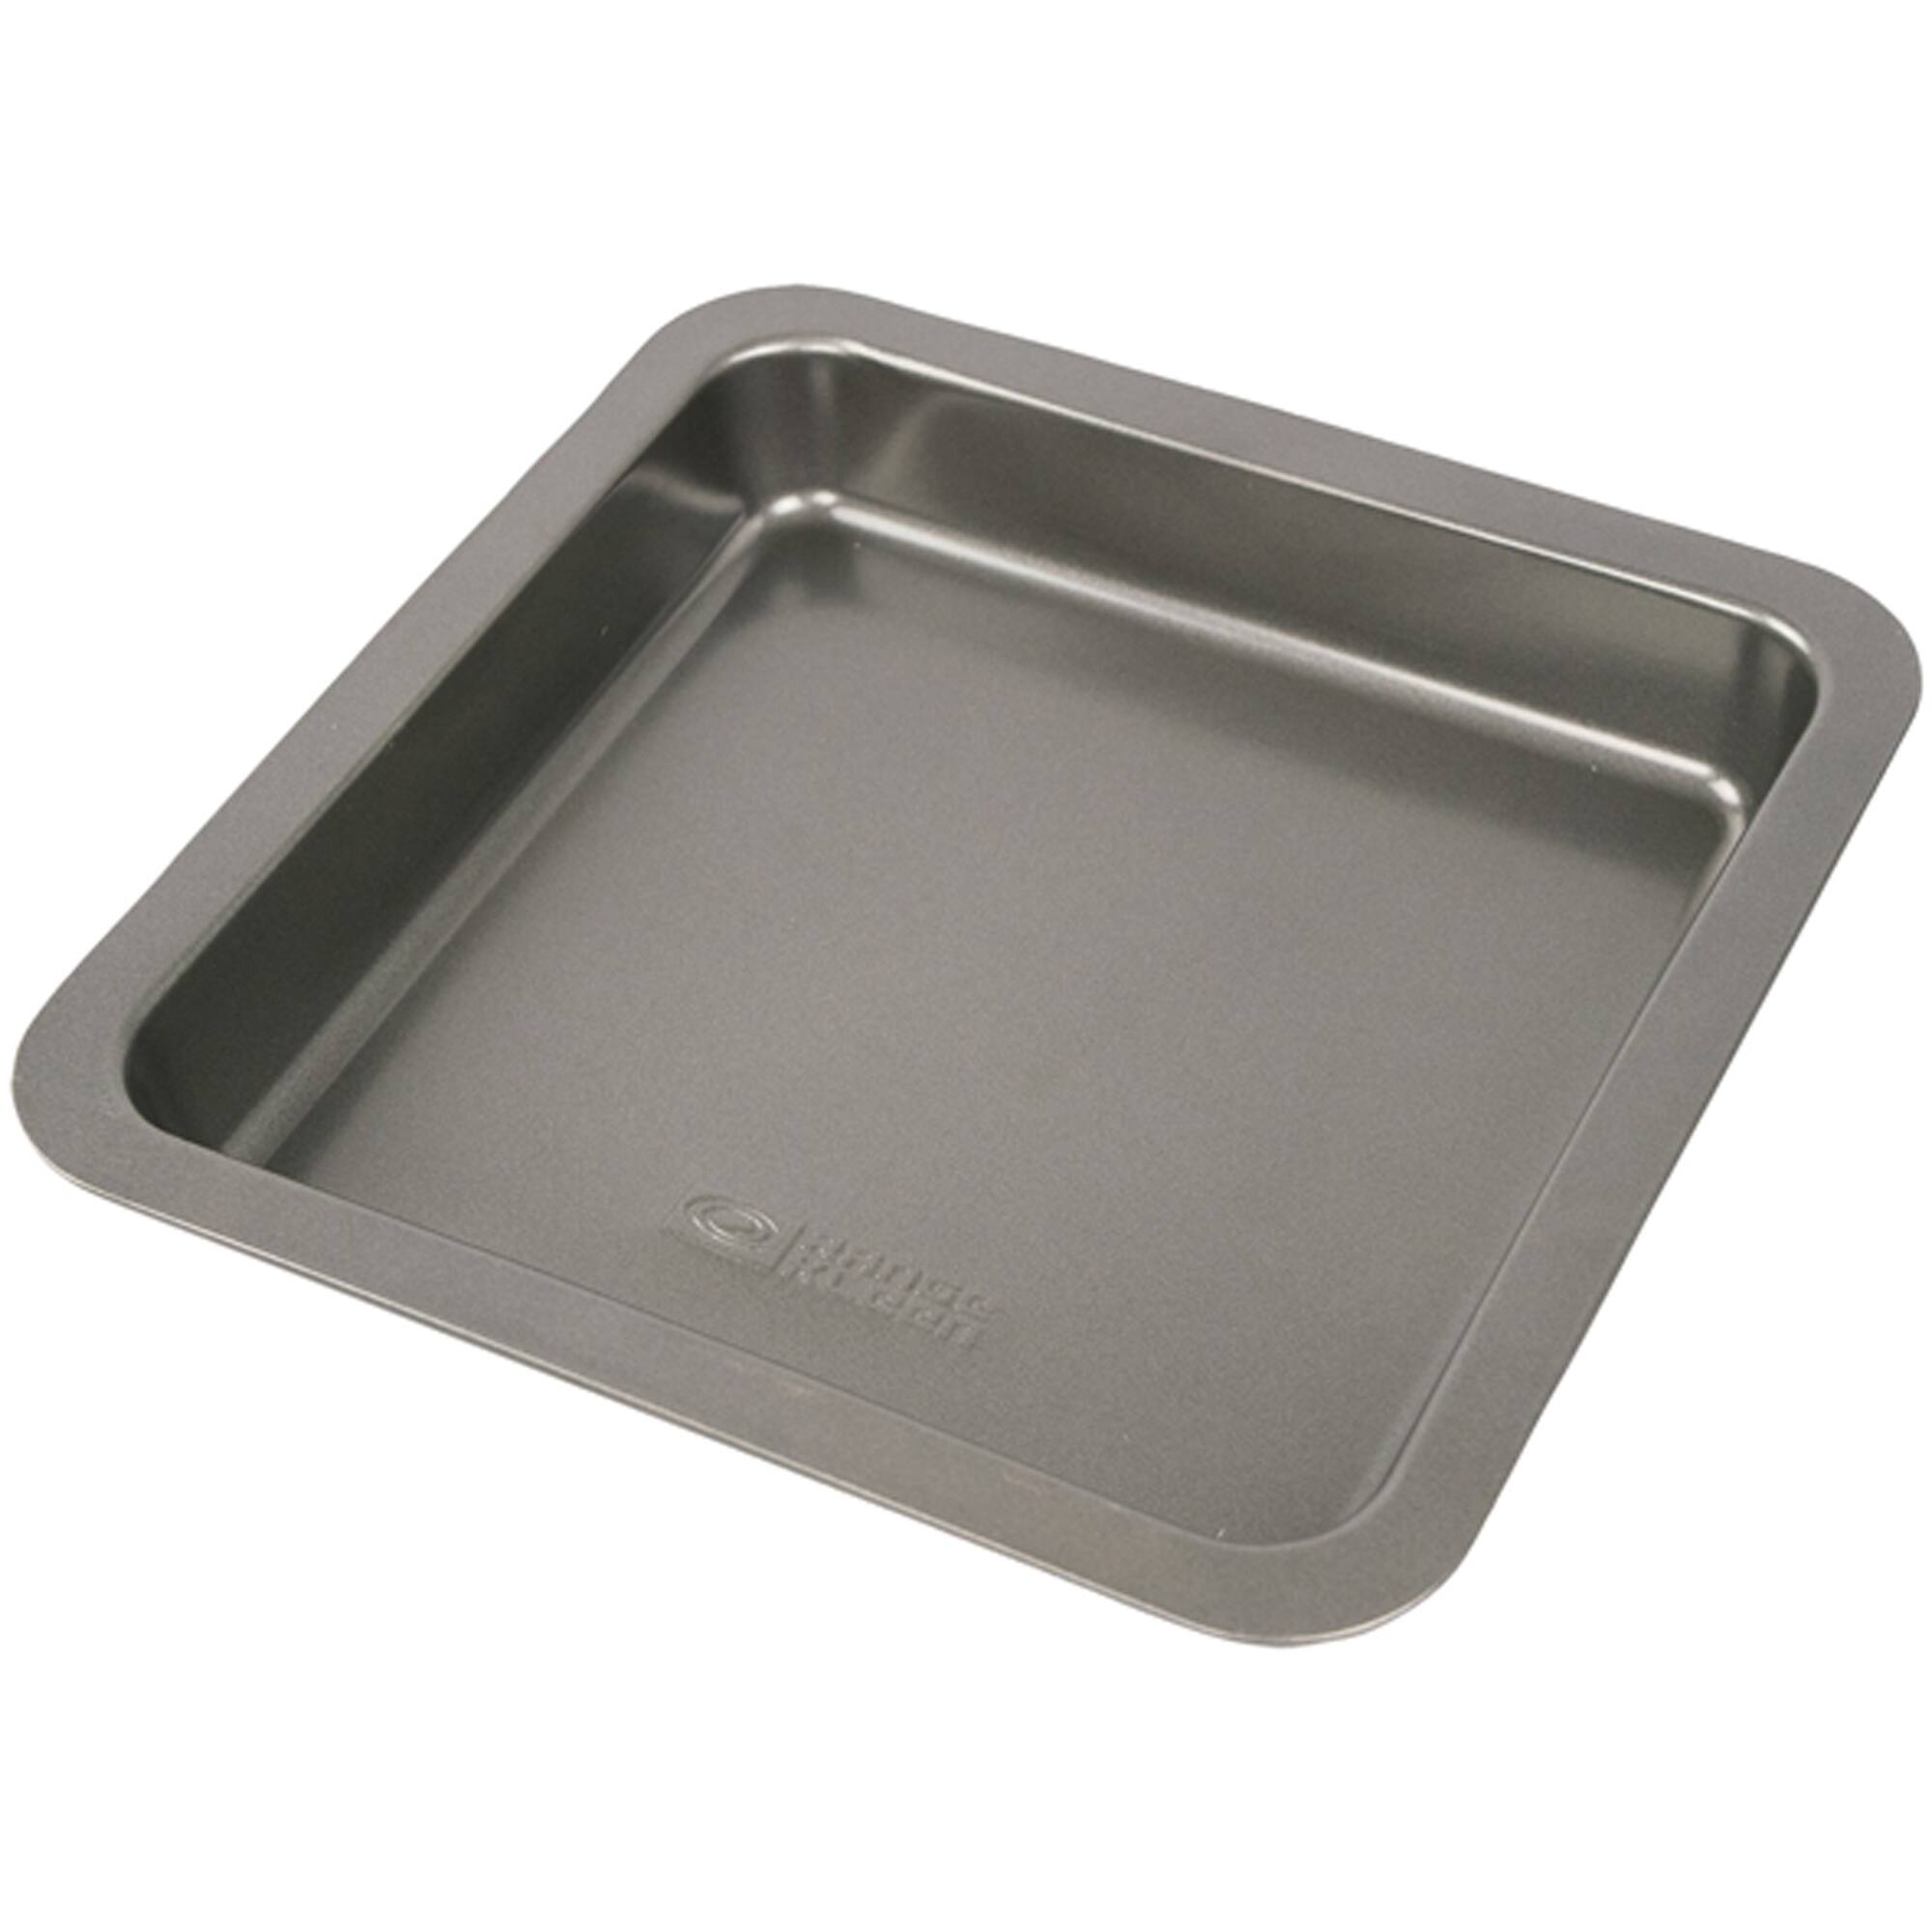 Cake Pan Atbp. - ✨ Square Pan 2 Inches Height ✨ Product Details 📌Available  size ✨7x7, 8x8, 9x9, 10x10, 11x11, 12x12 📌 2 Inches Height 📌 You can buy  as set or